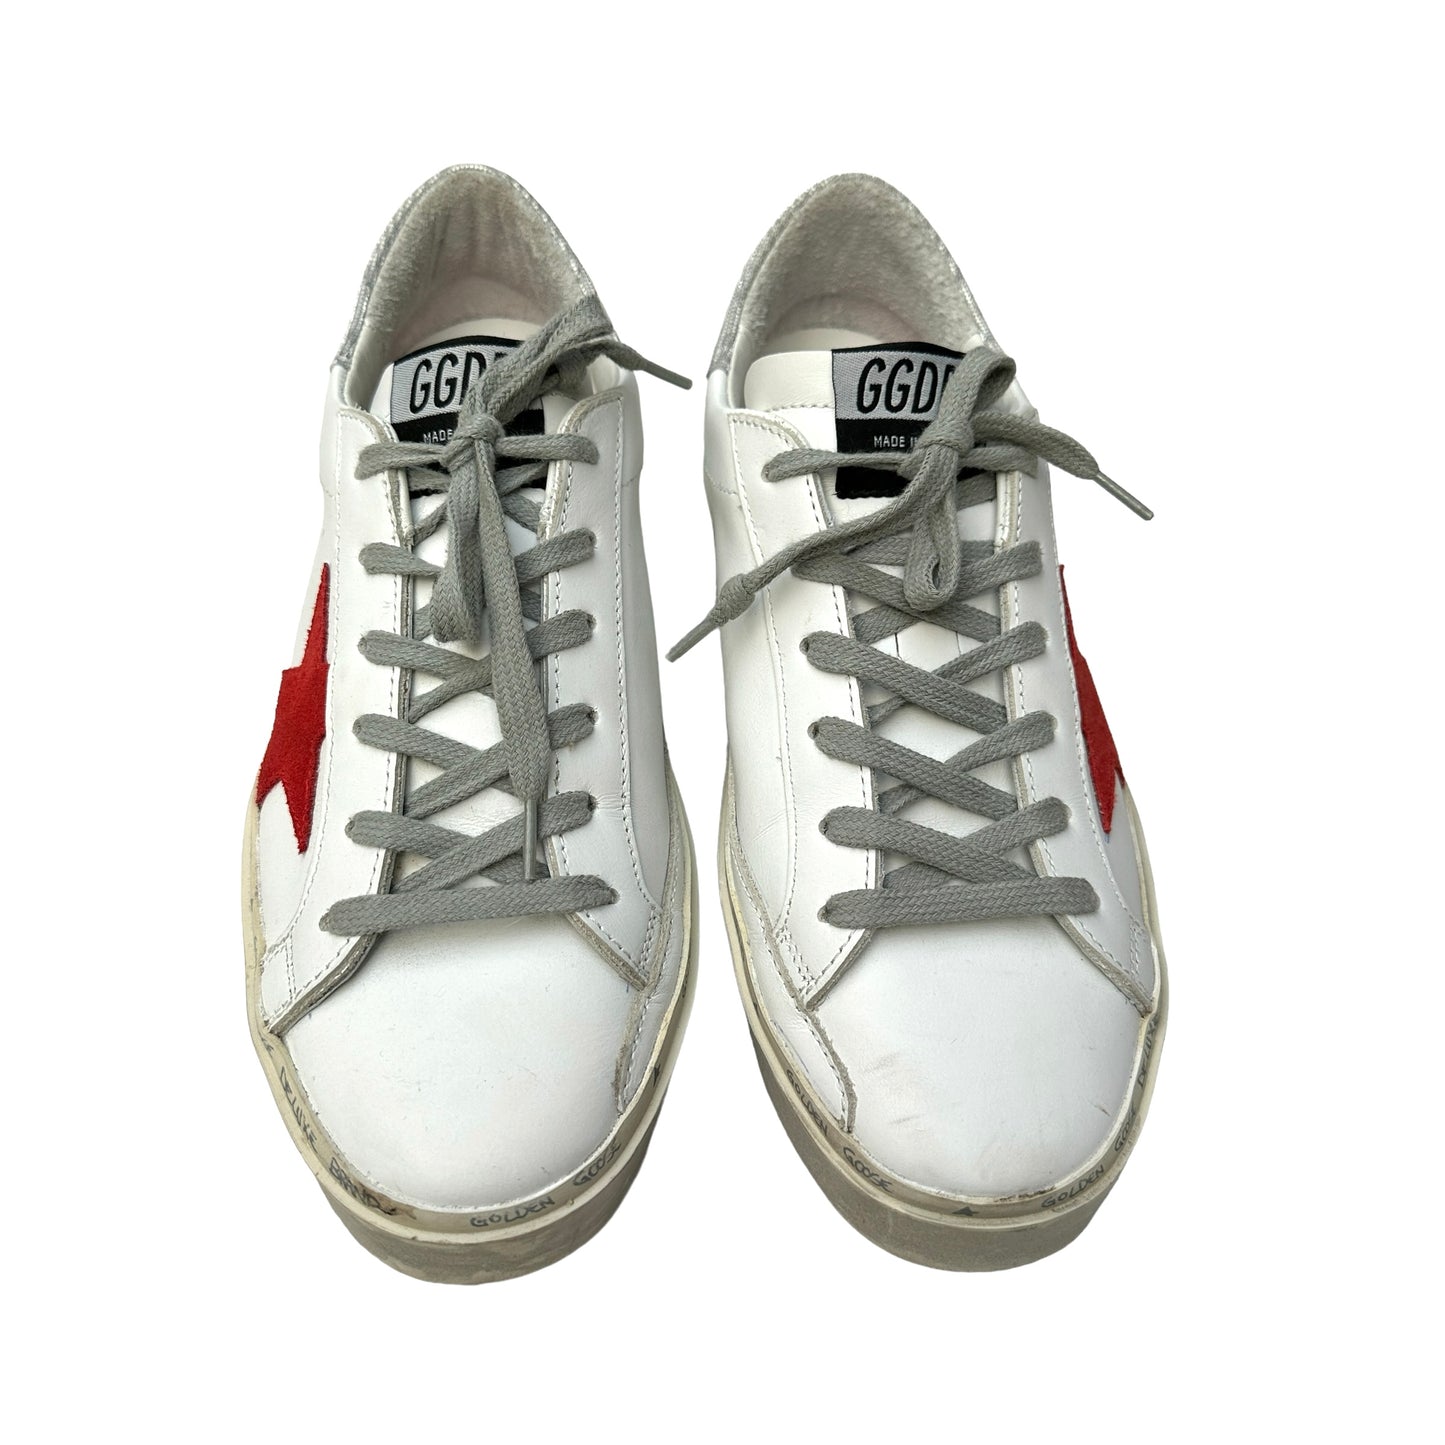 White Leather Hi Star Sneakers - 8